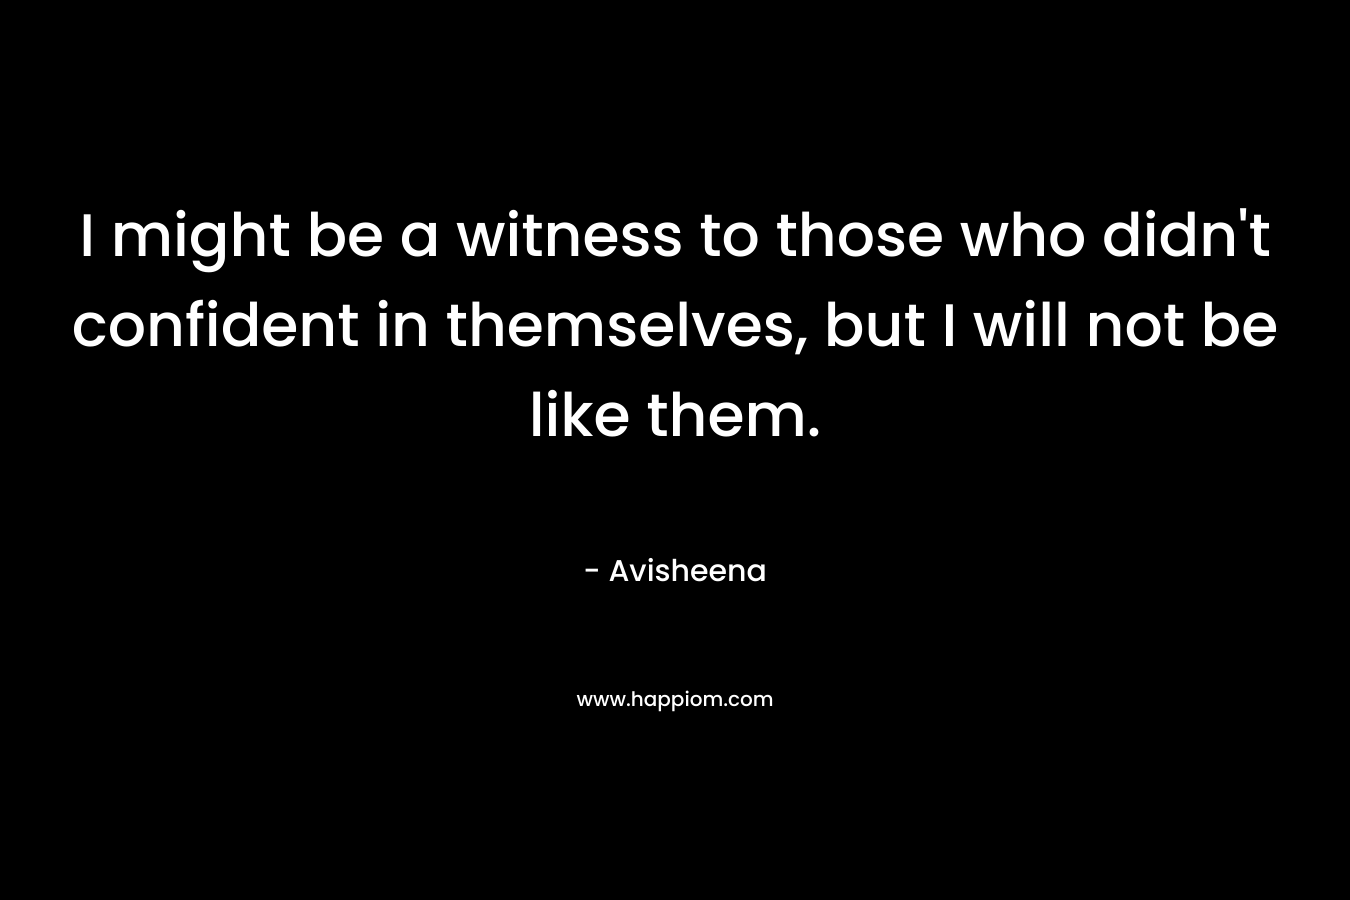 I might be a witness to those who didn't confident in themselves, but I will not be like them.